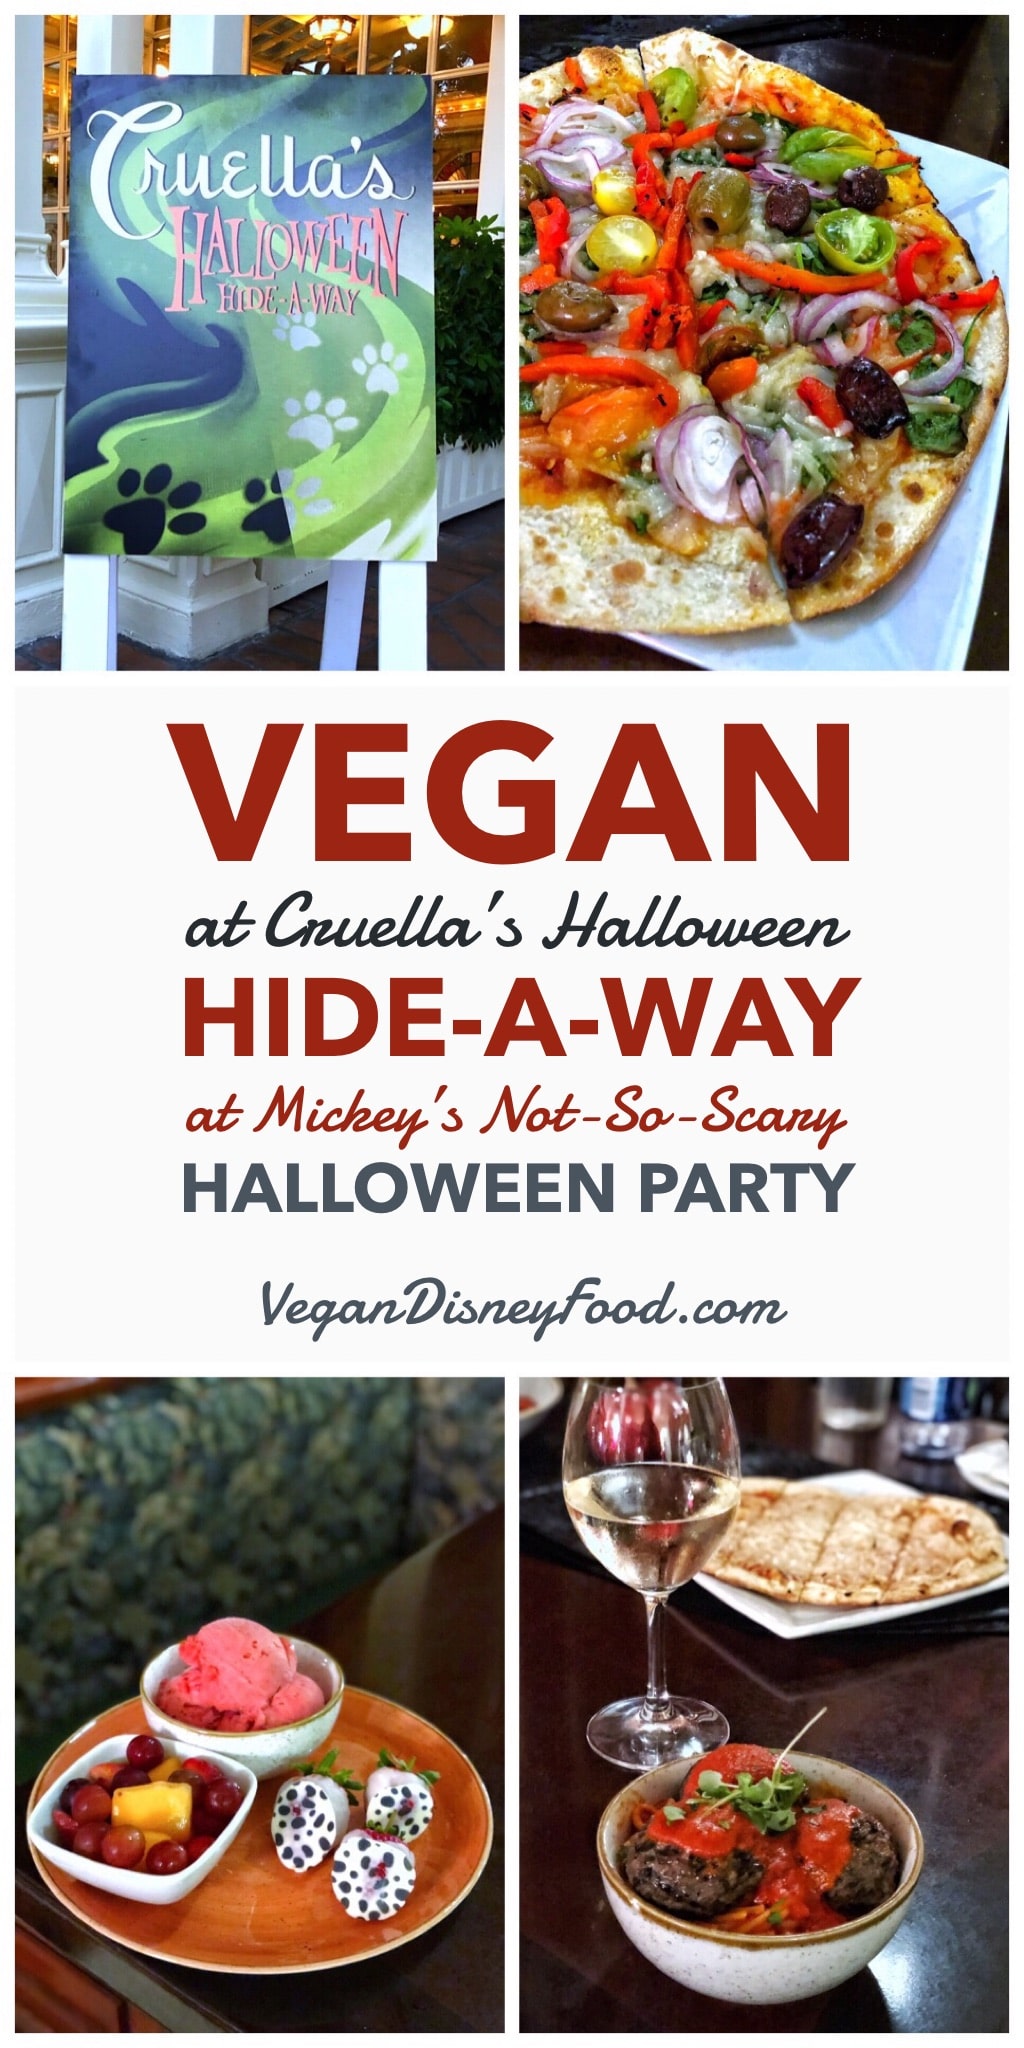 Vegan Options at Cruella’s Halloween Hide-A-Way in the Magic Kingdom during Mickey’s Not So Scary Halloween Party